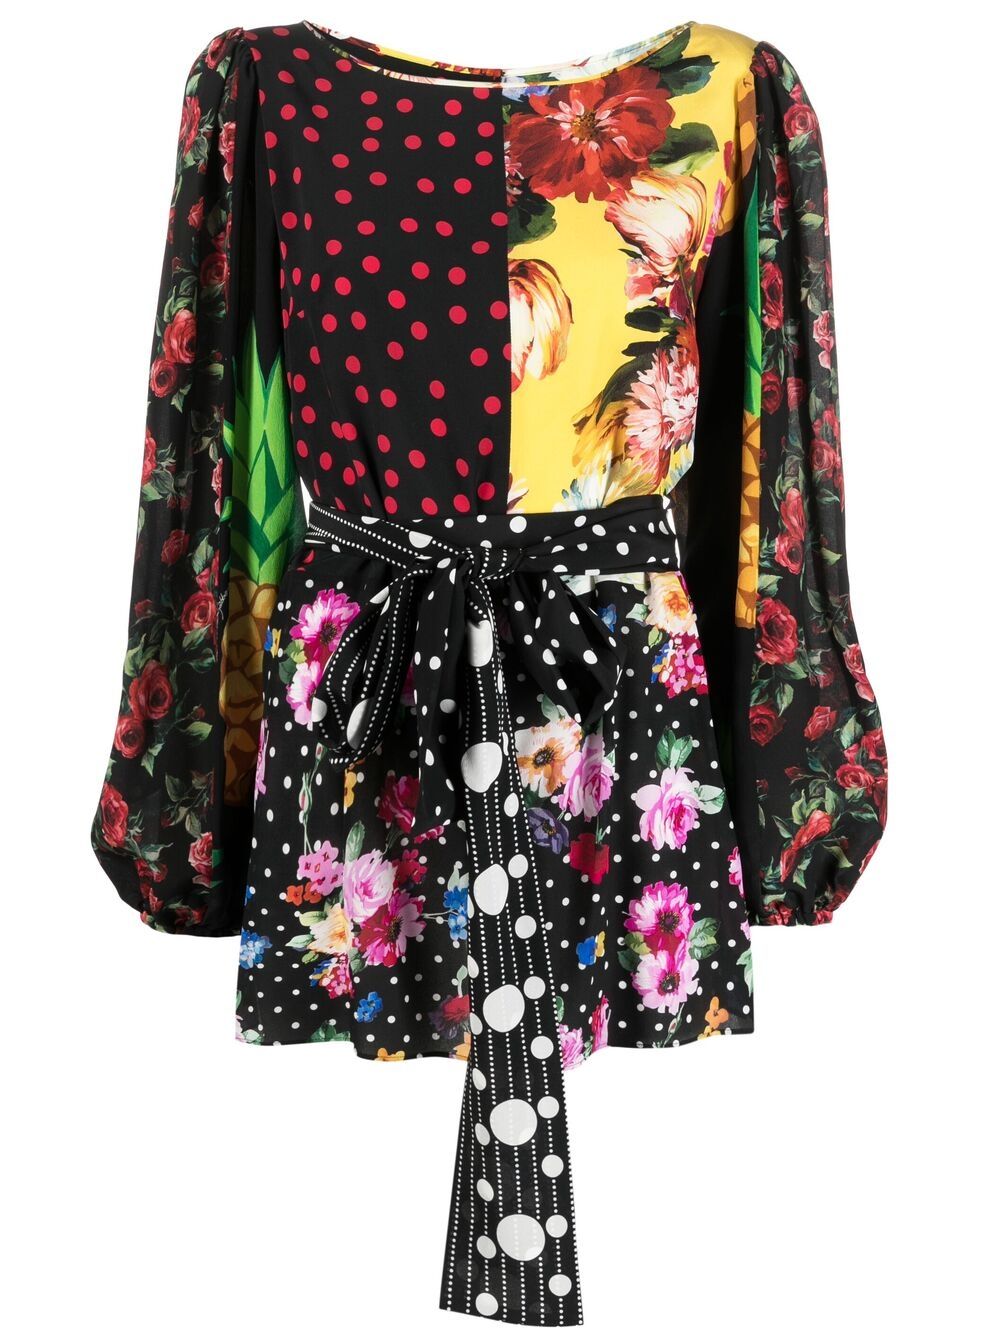 DOLCE & GABBANA PATCHWORK BELTED BLOUSE